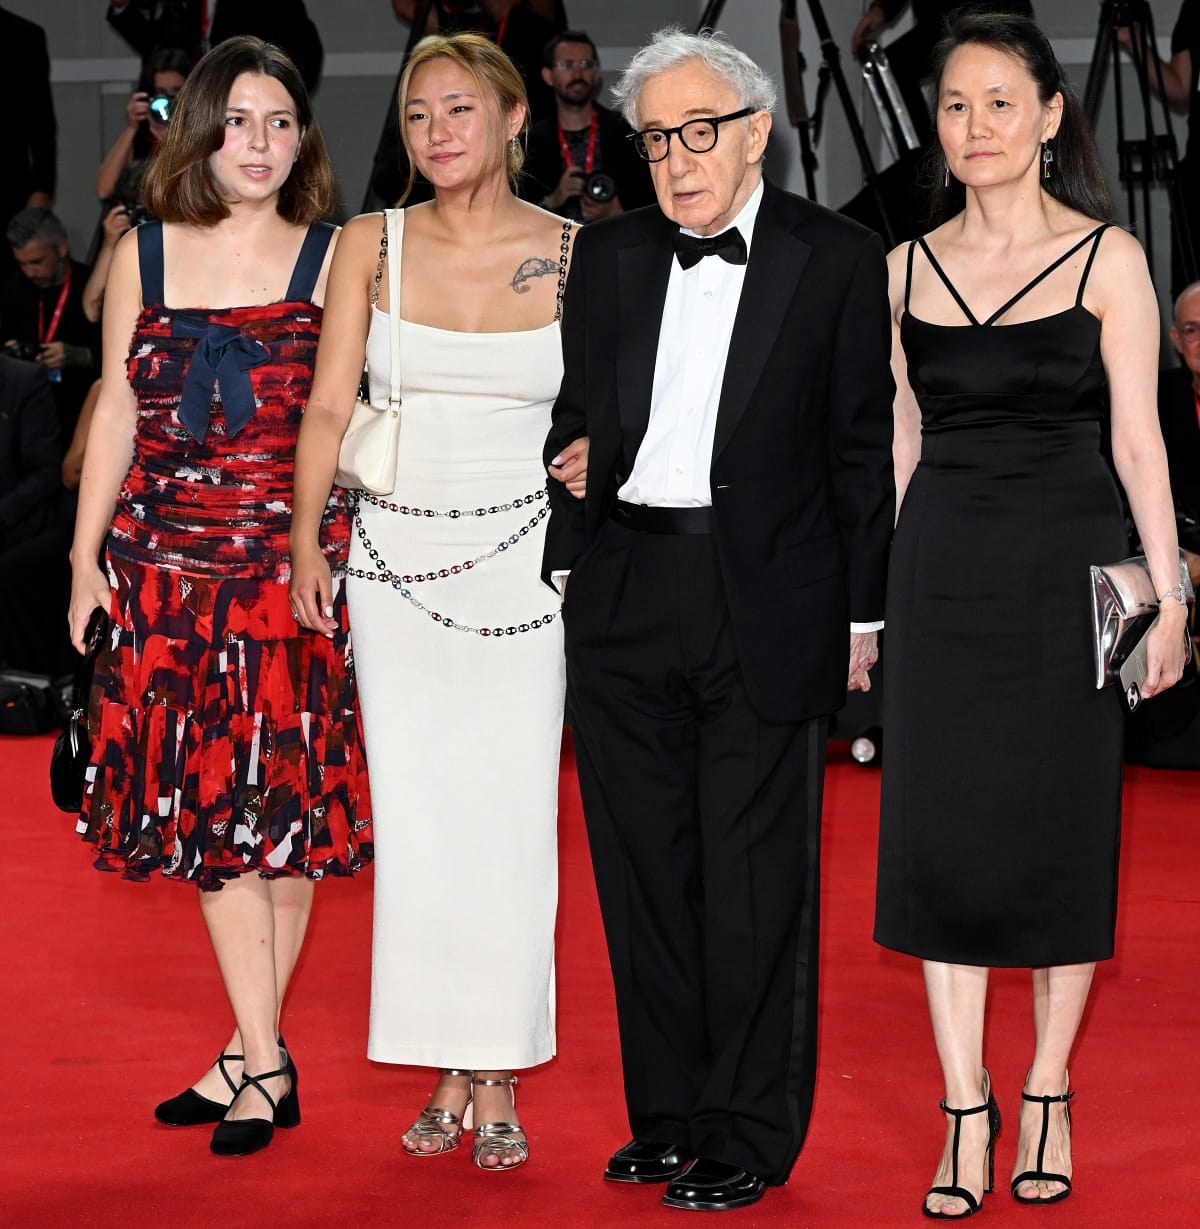 Woody Allen and Soon-Yi Previn have adopted two daughters, Bechet Dumaine Allen and Manzie Tio Allen